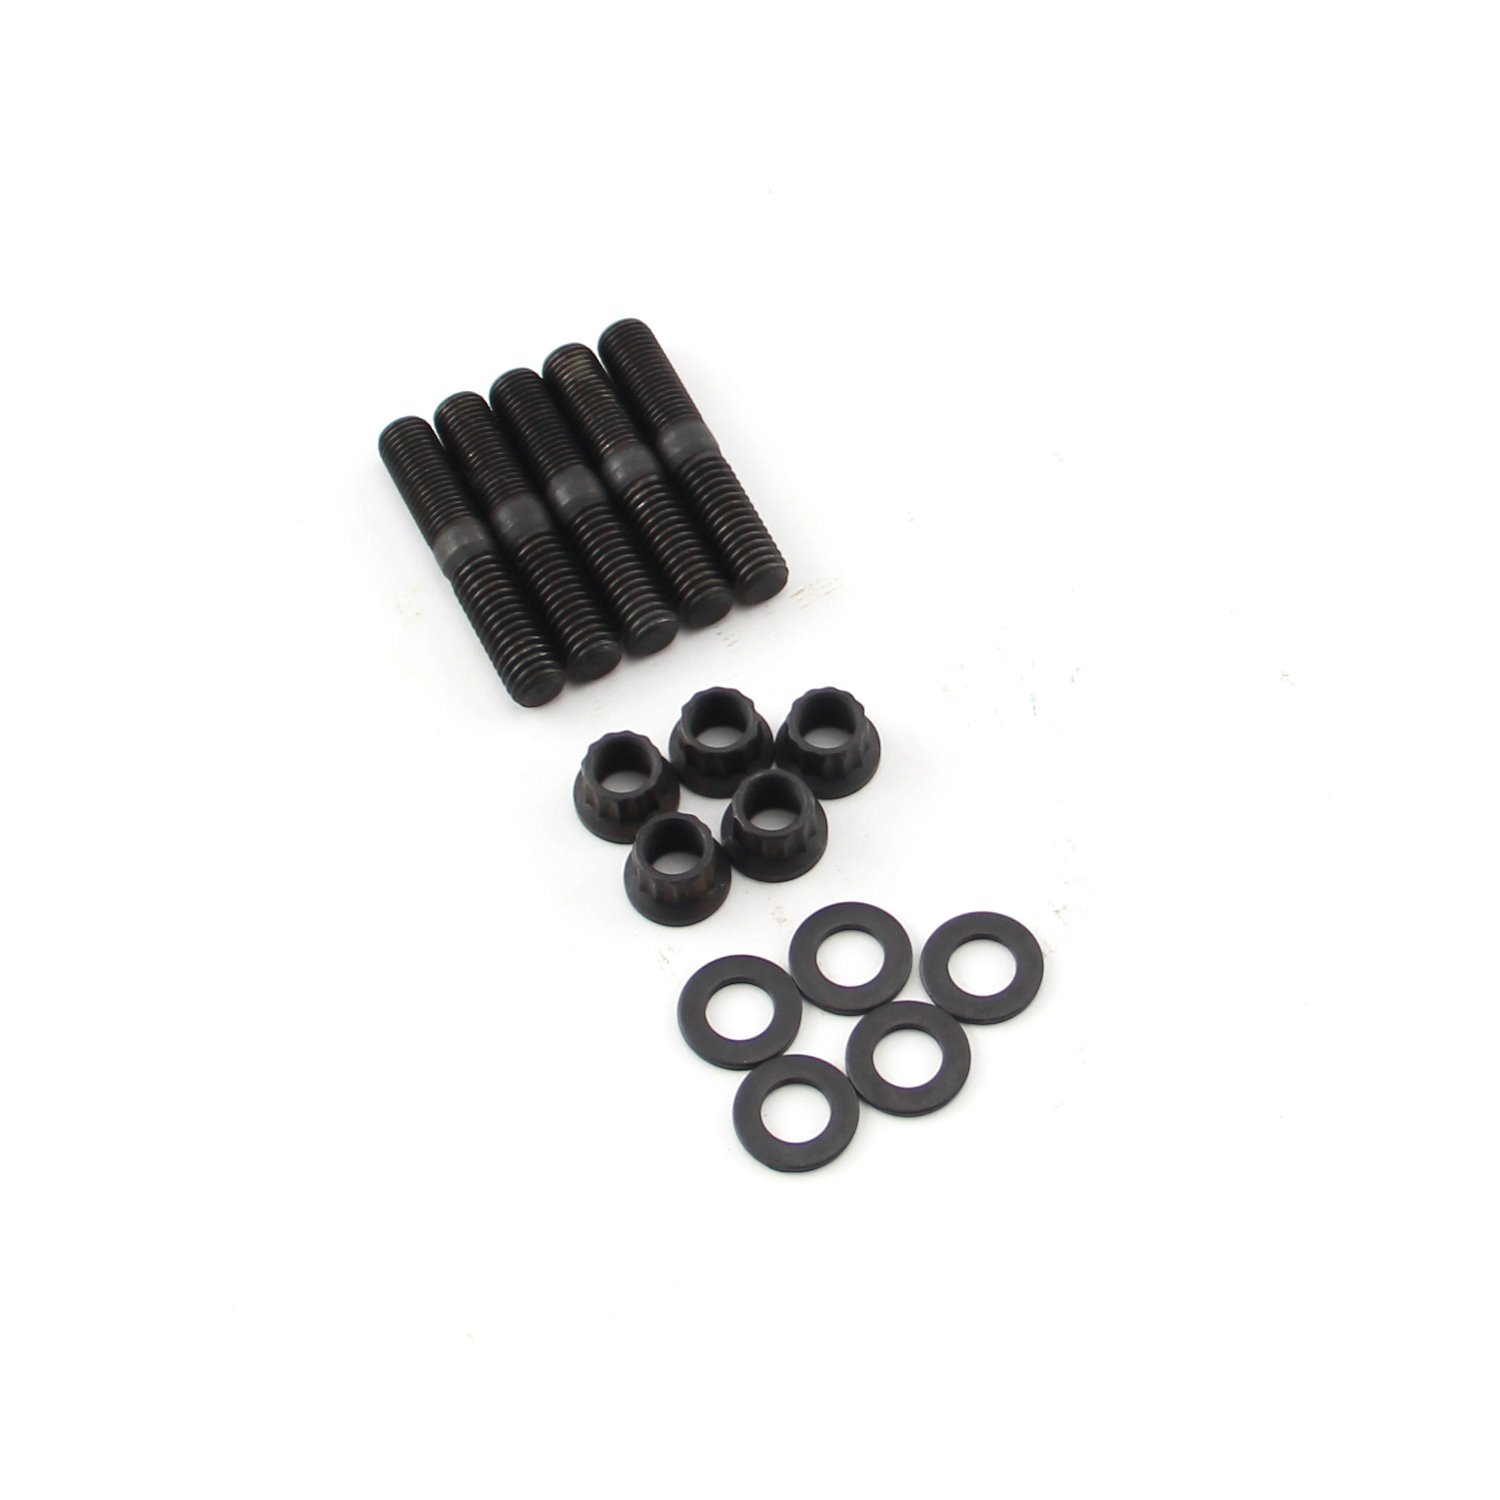 PCE208.1001 12-Point Black Oxide Pinion Support Stud Kit Ford 9 inch